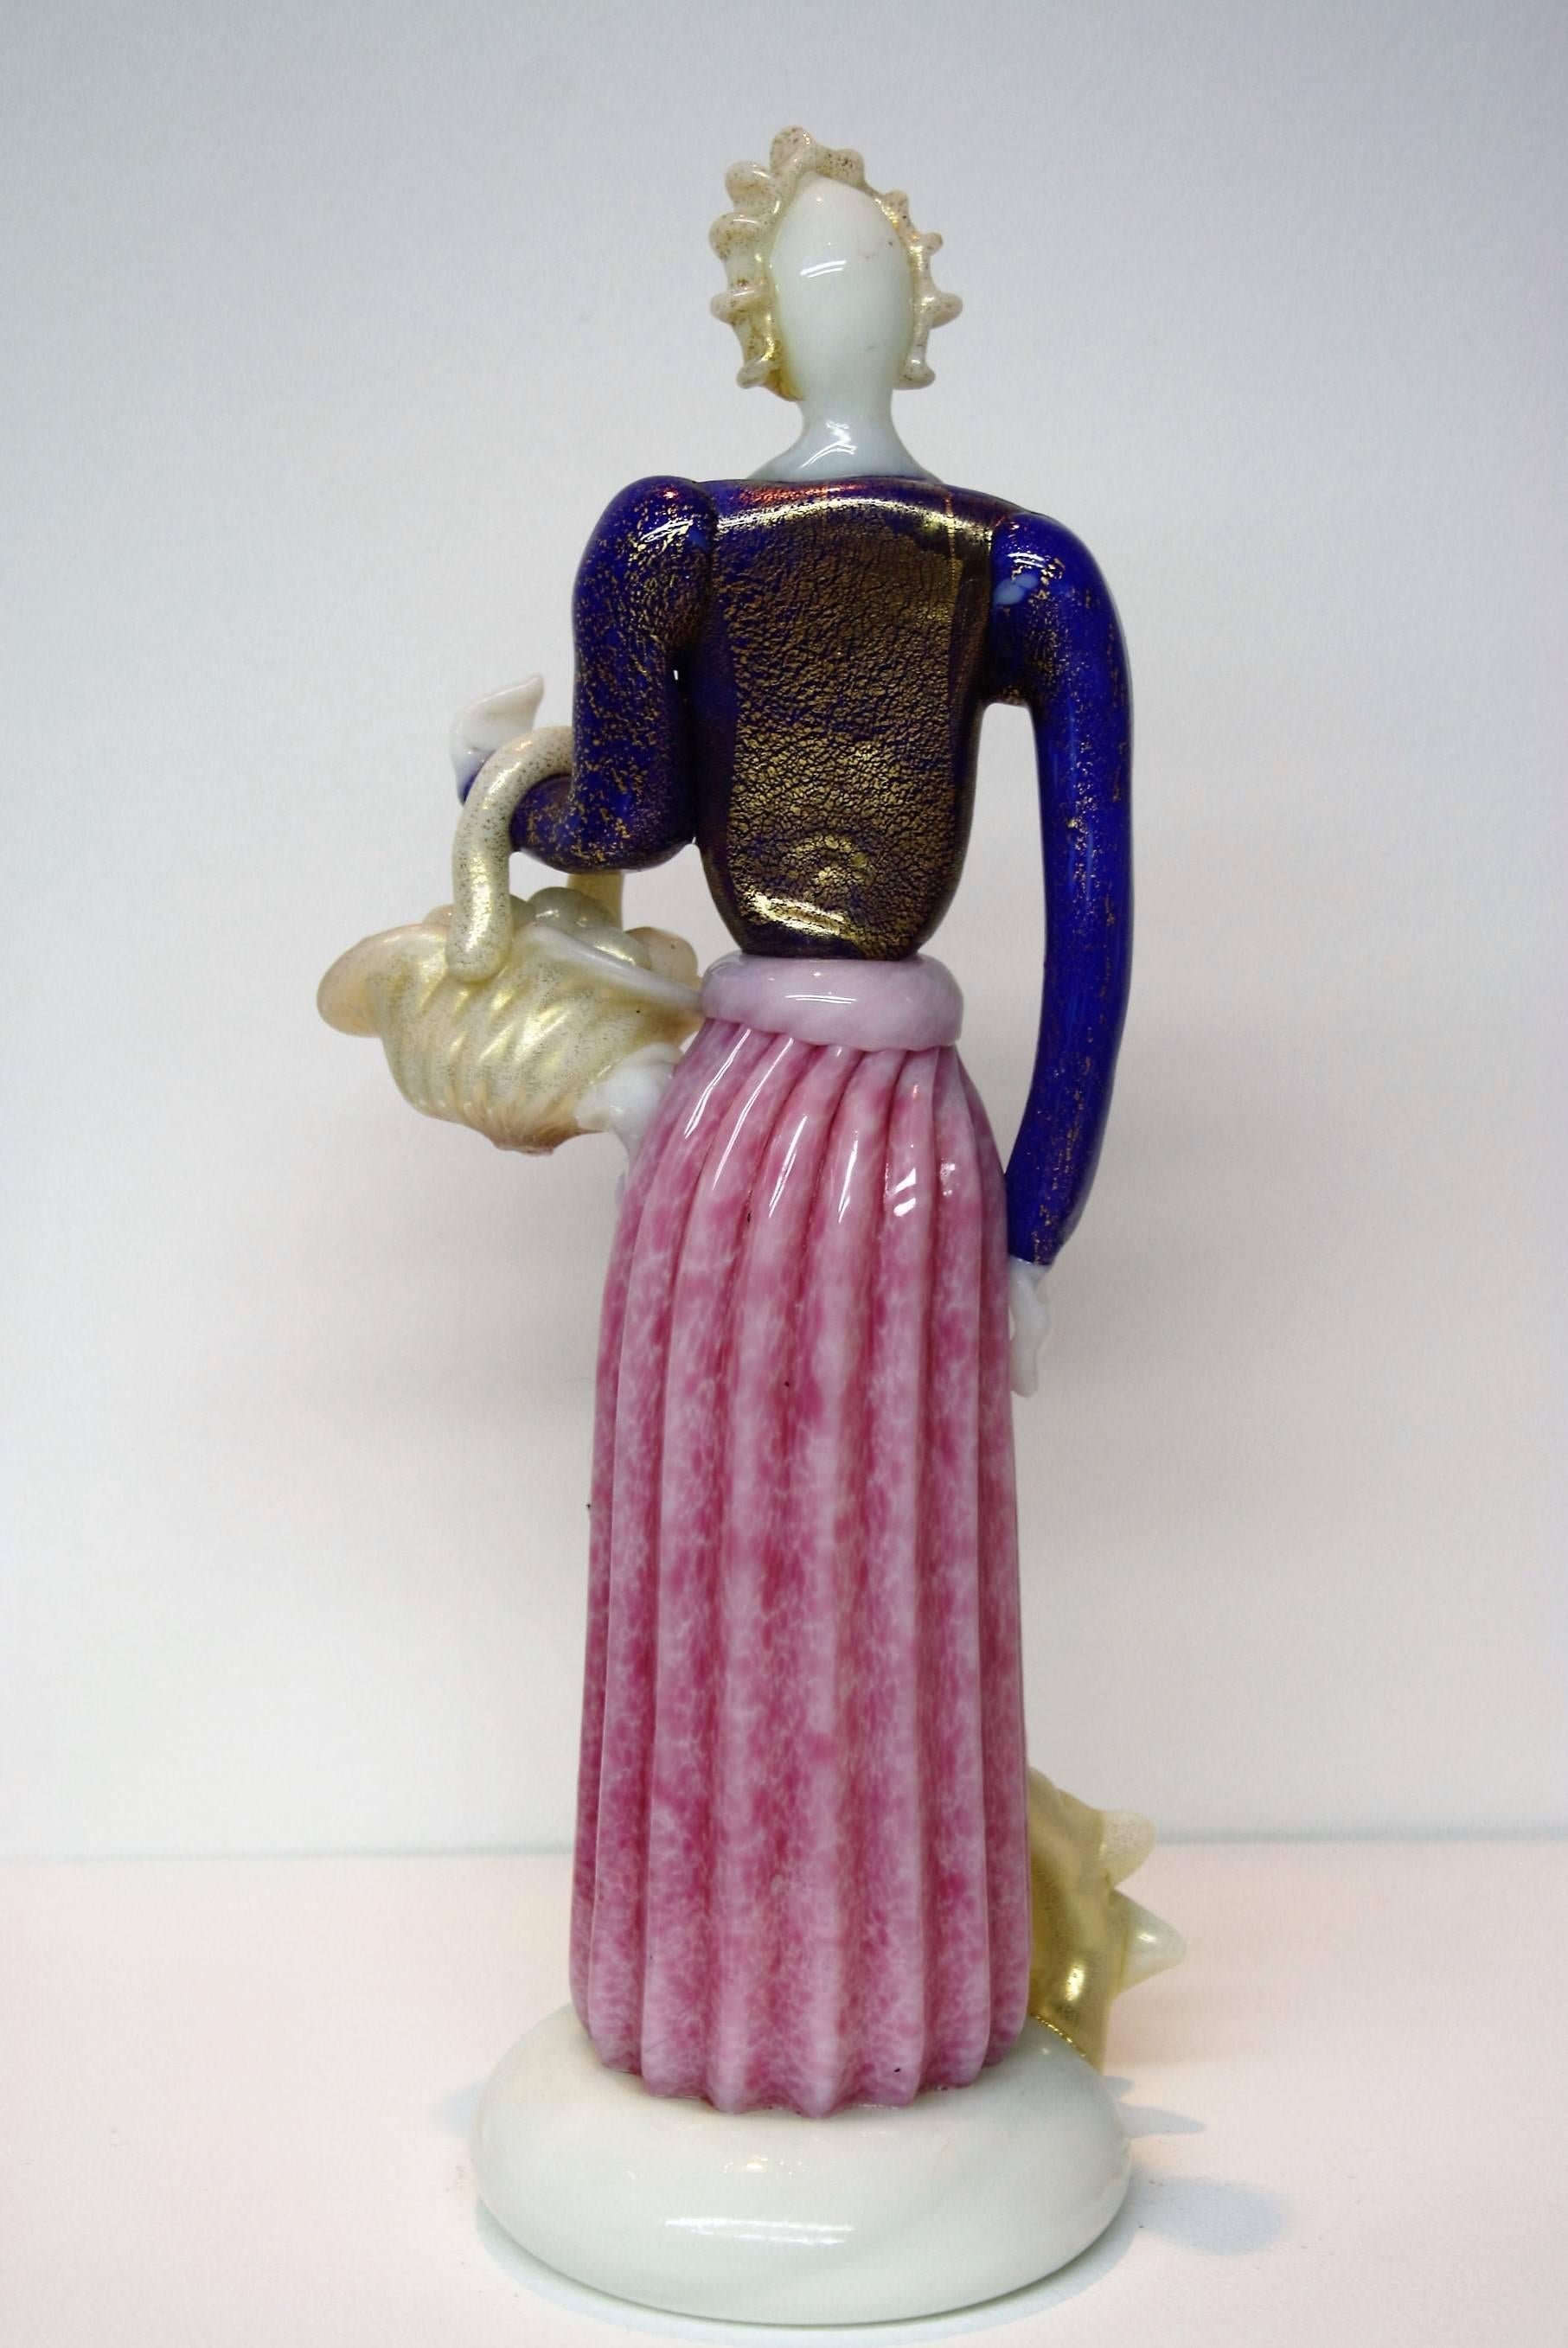 Early glass figurine designed by Ercole Barovier, Murano, Italy, 1934.
 